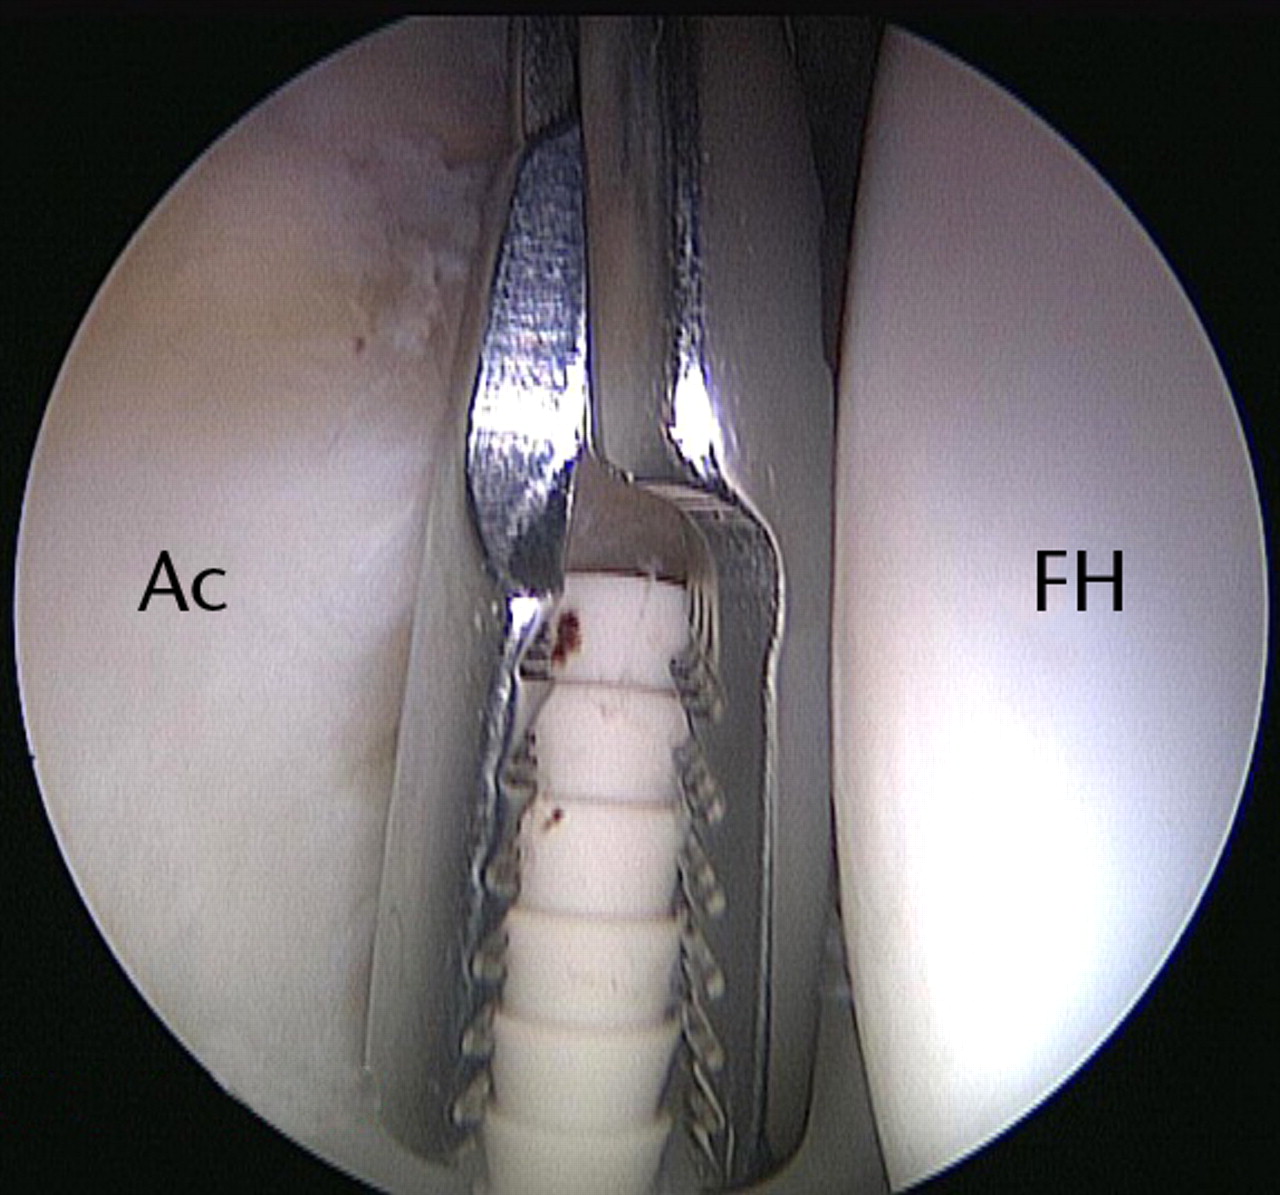 Fig. 5 
          Arthroscopic image showing retrieval
of a broken suture anchor from the anterior joint space of the central compartment
during attempted labral repair (FH, femoral head; Ac, acetabulum).
        